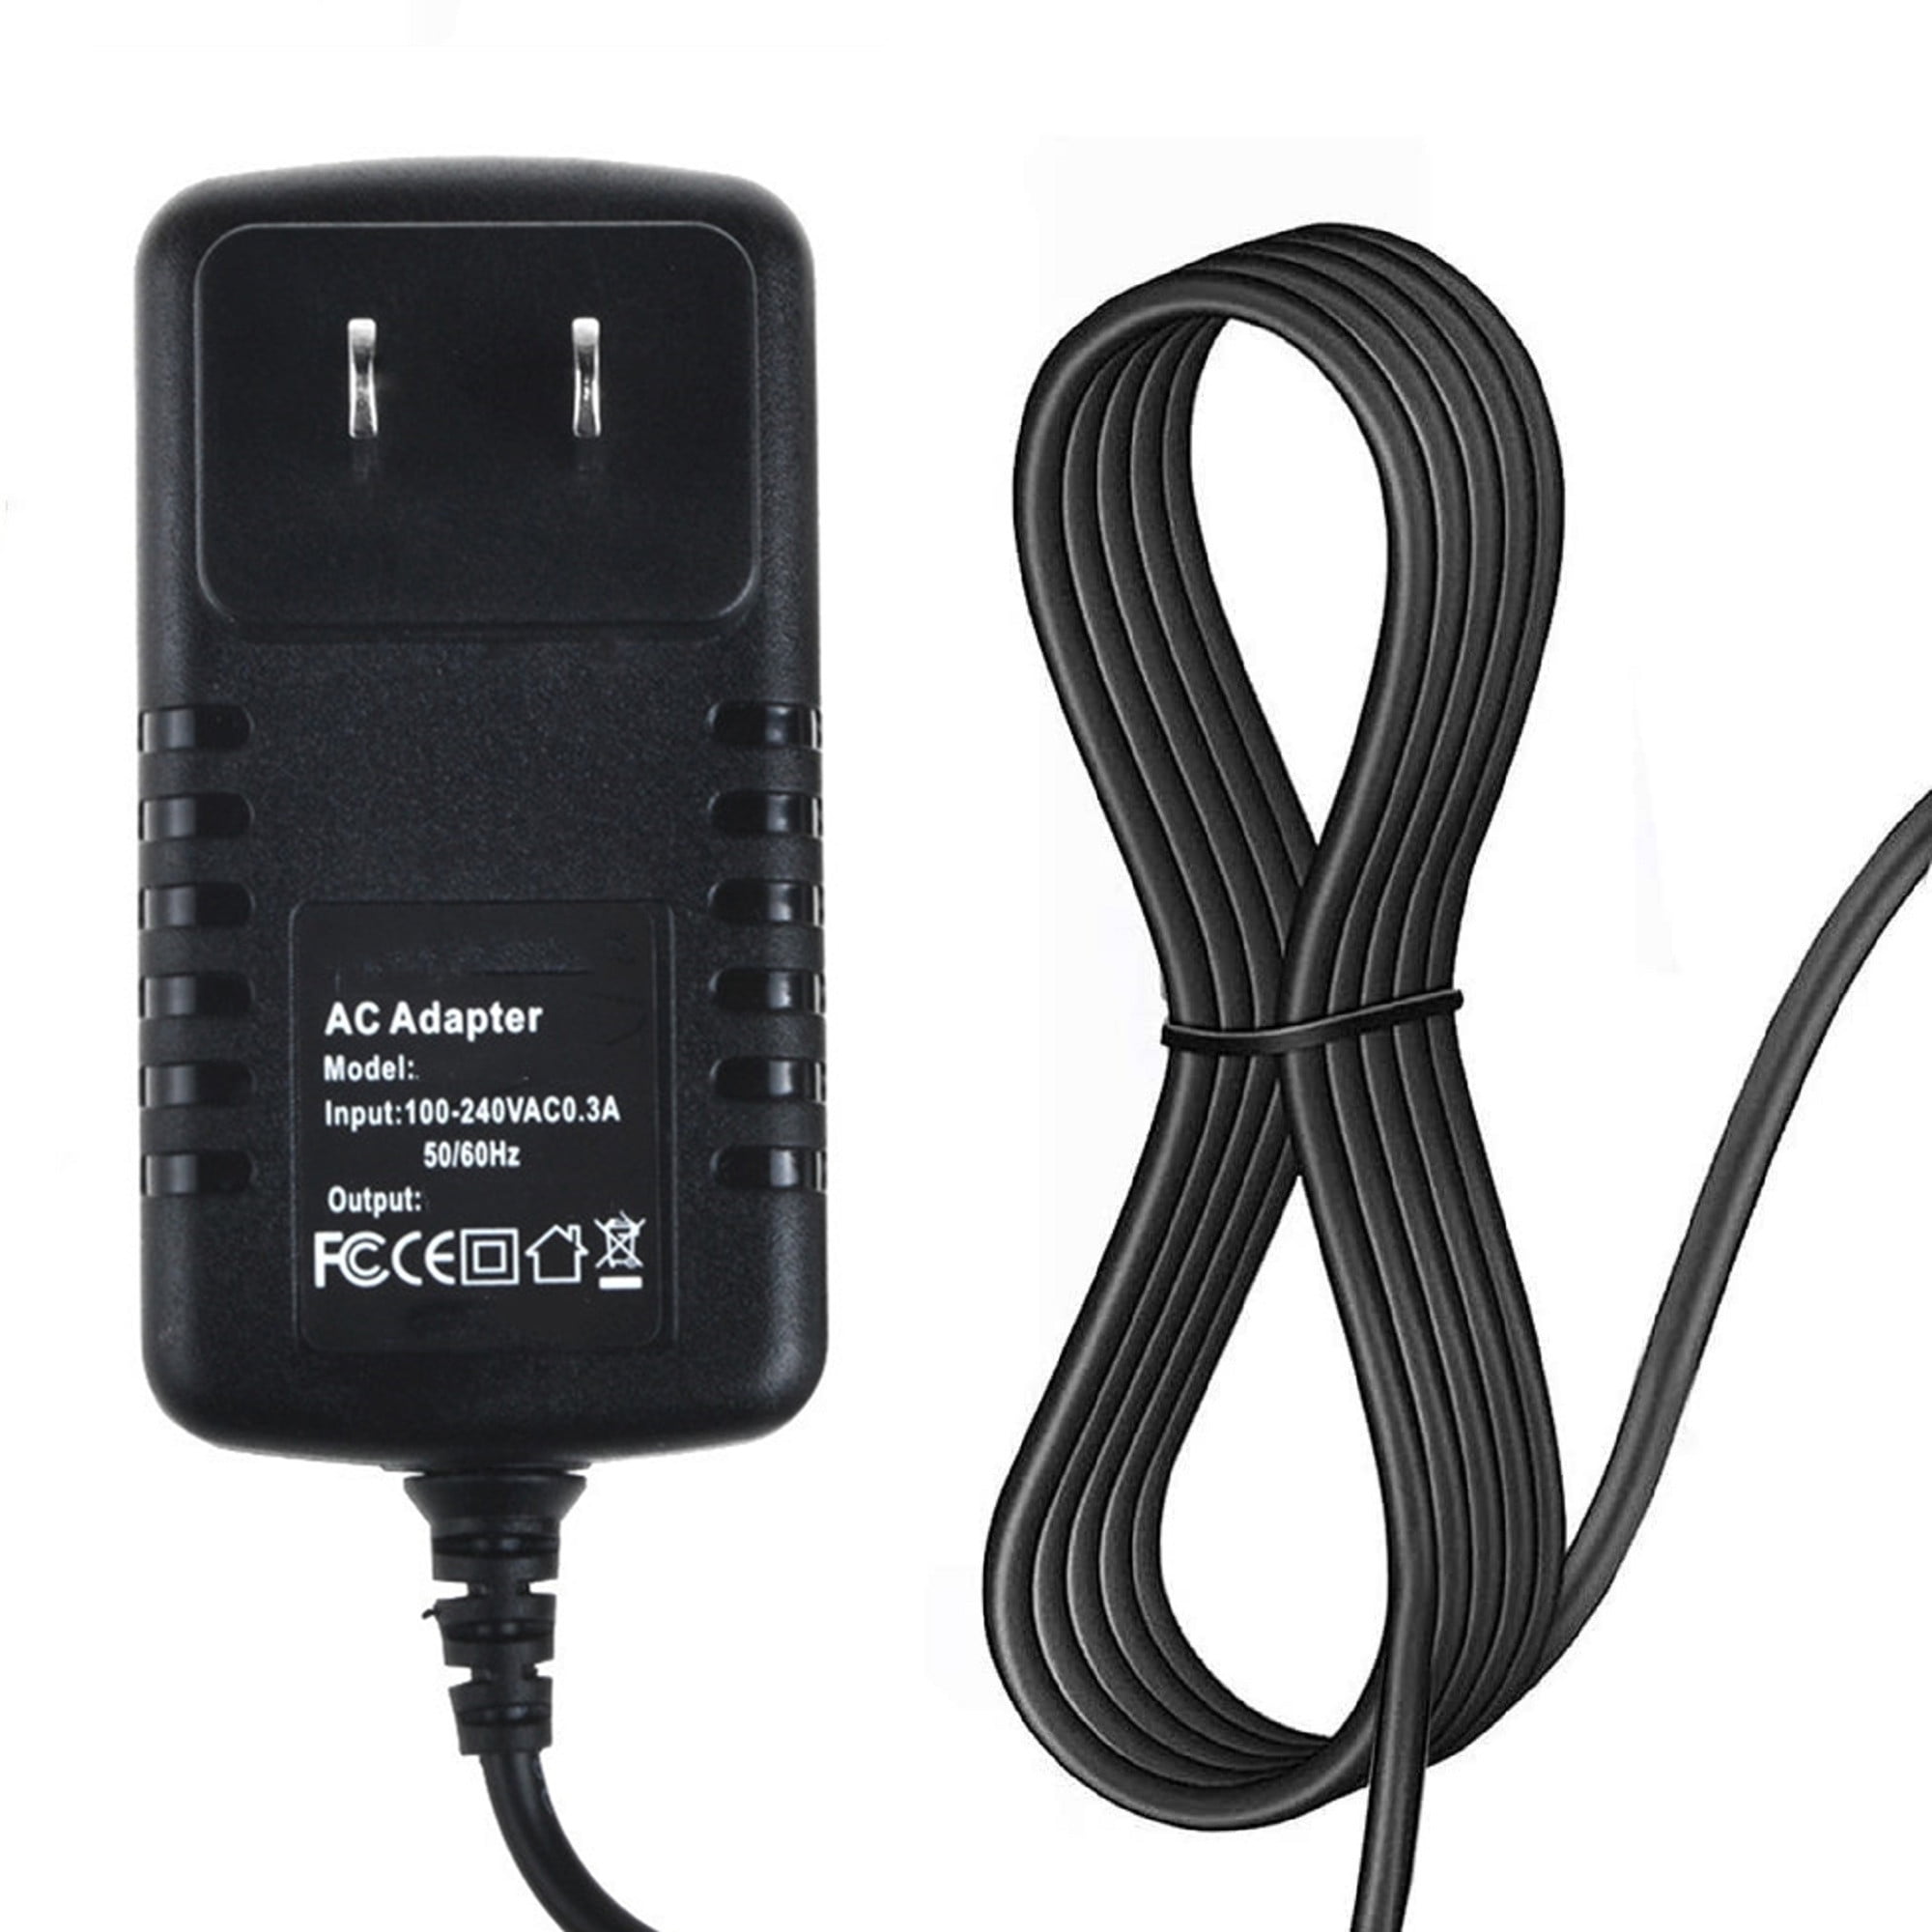 K-MAINS AC/DC Adapter Replacement for 2Wire 1800HG HyperG